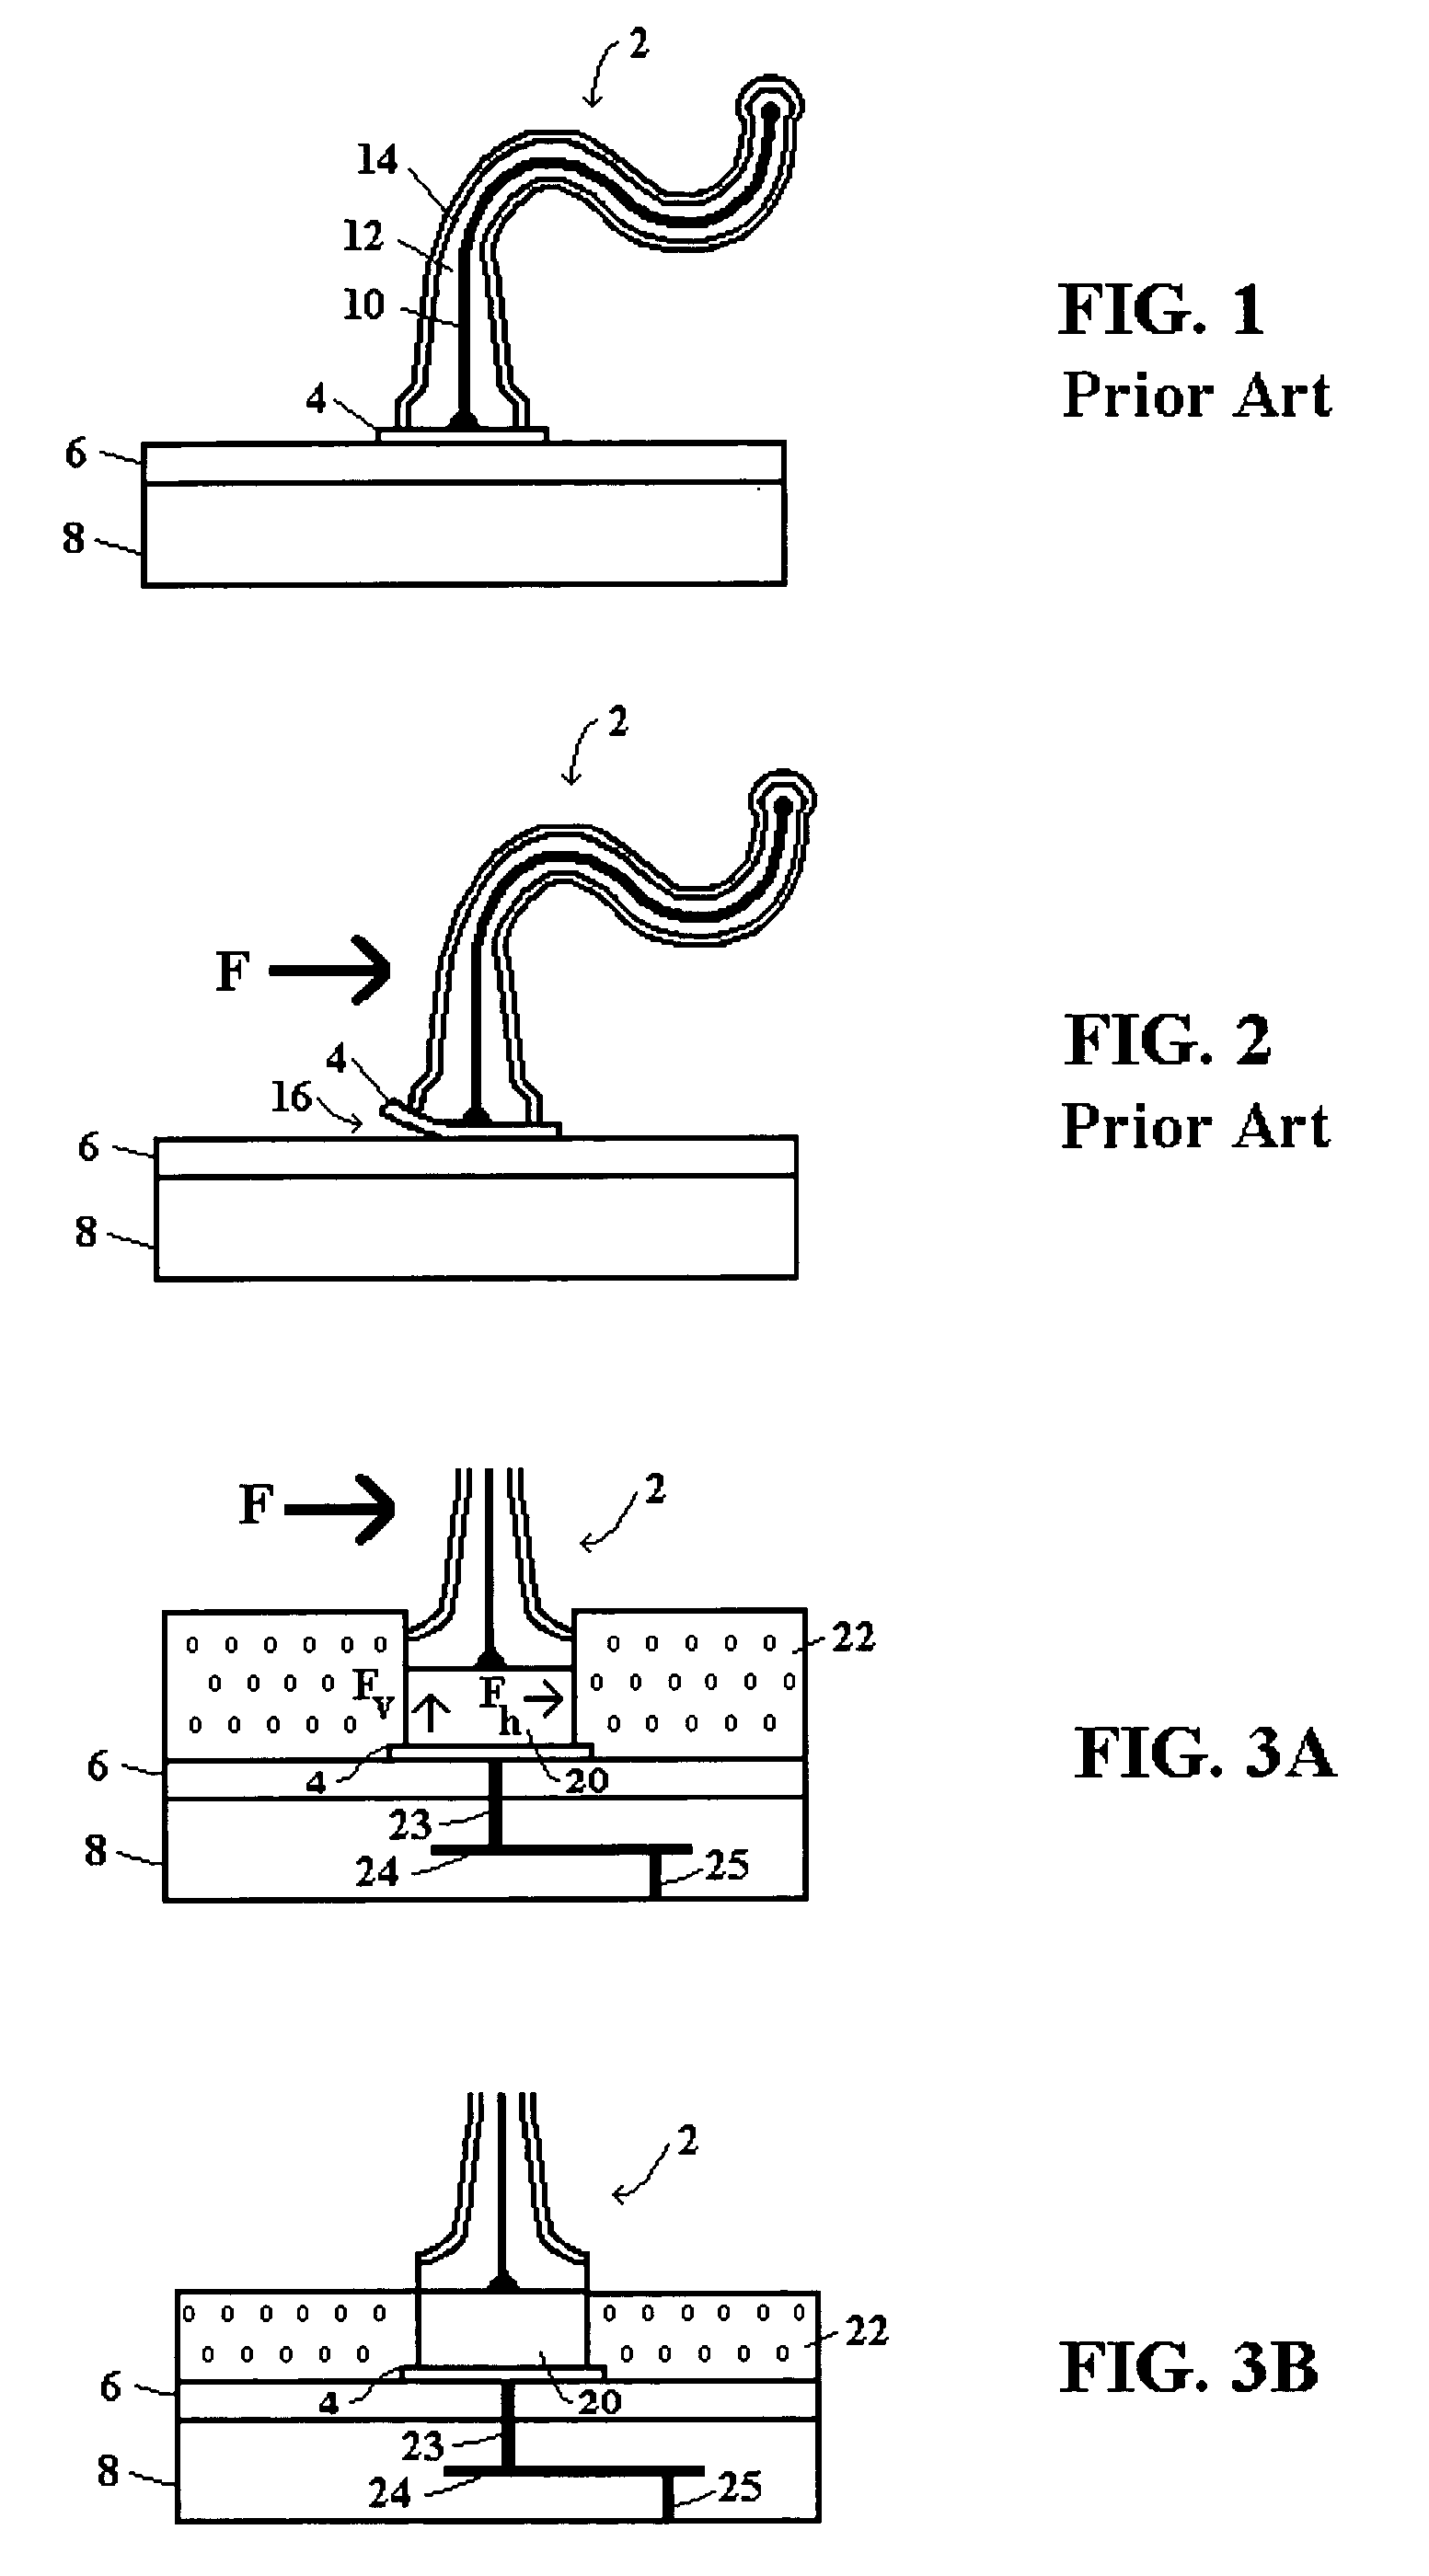 Method to build robust mechanical structures on substrate surfaces